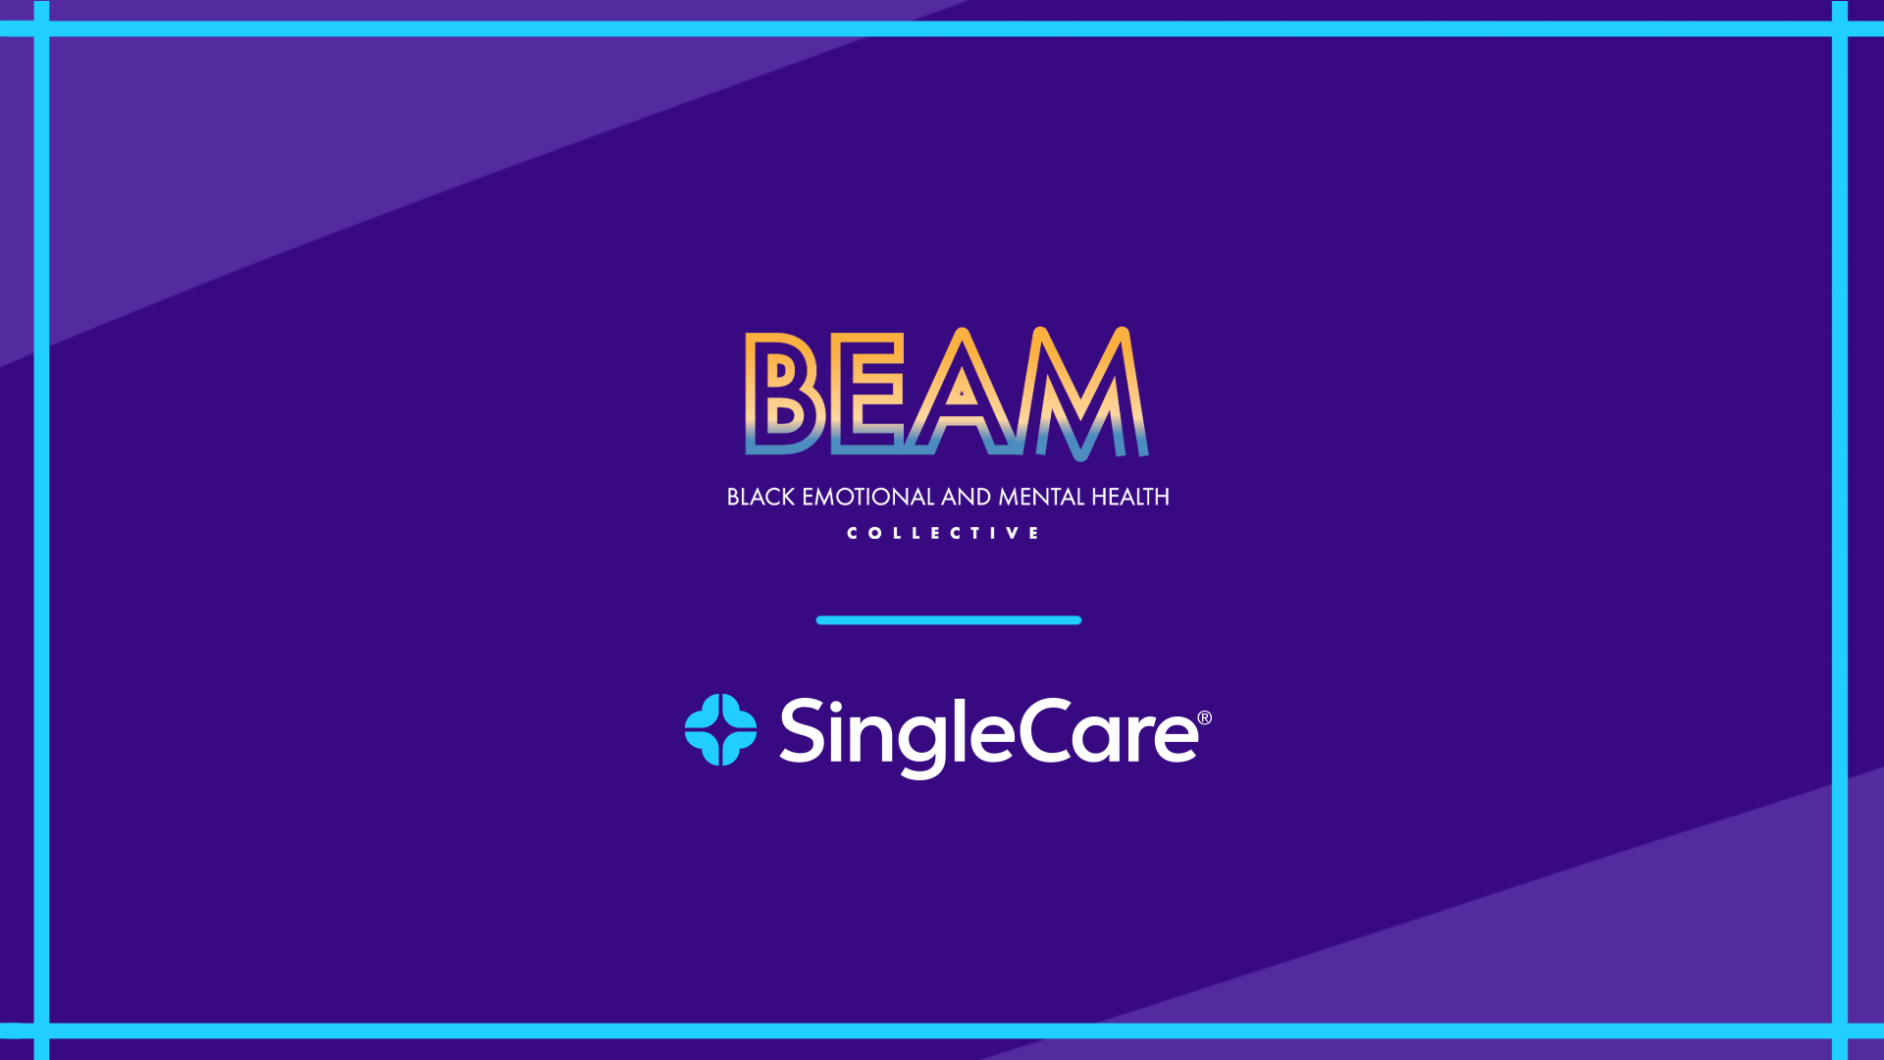 SingleCare partners with BEAM